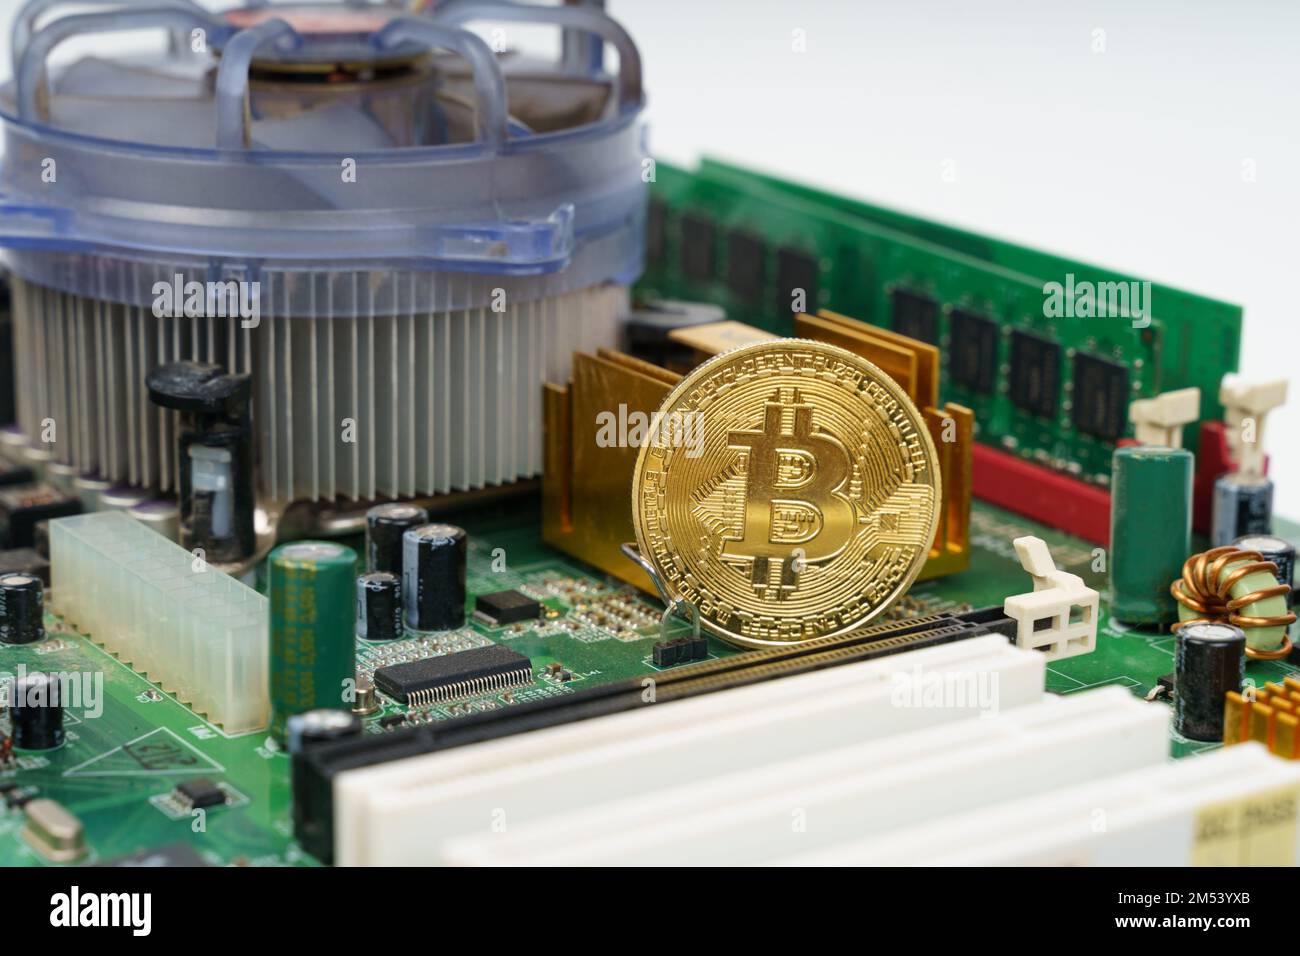 Business and technology concept. There is a golden bitcoin coin on the motherboard of the computer. Stock Photo